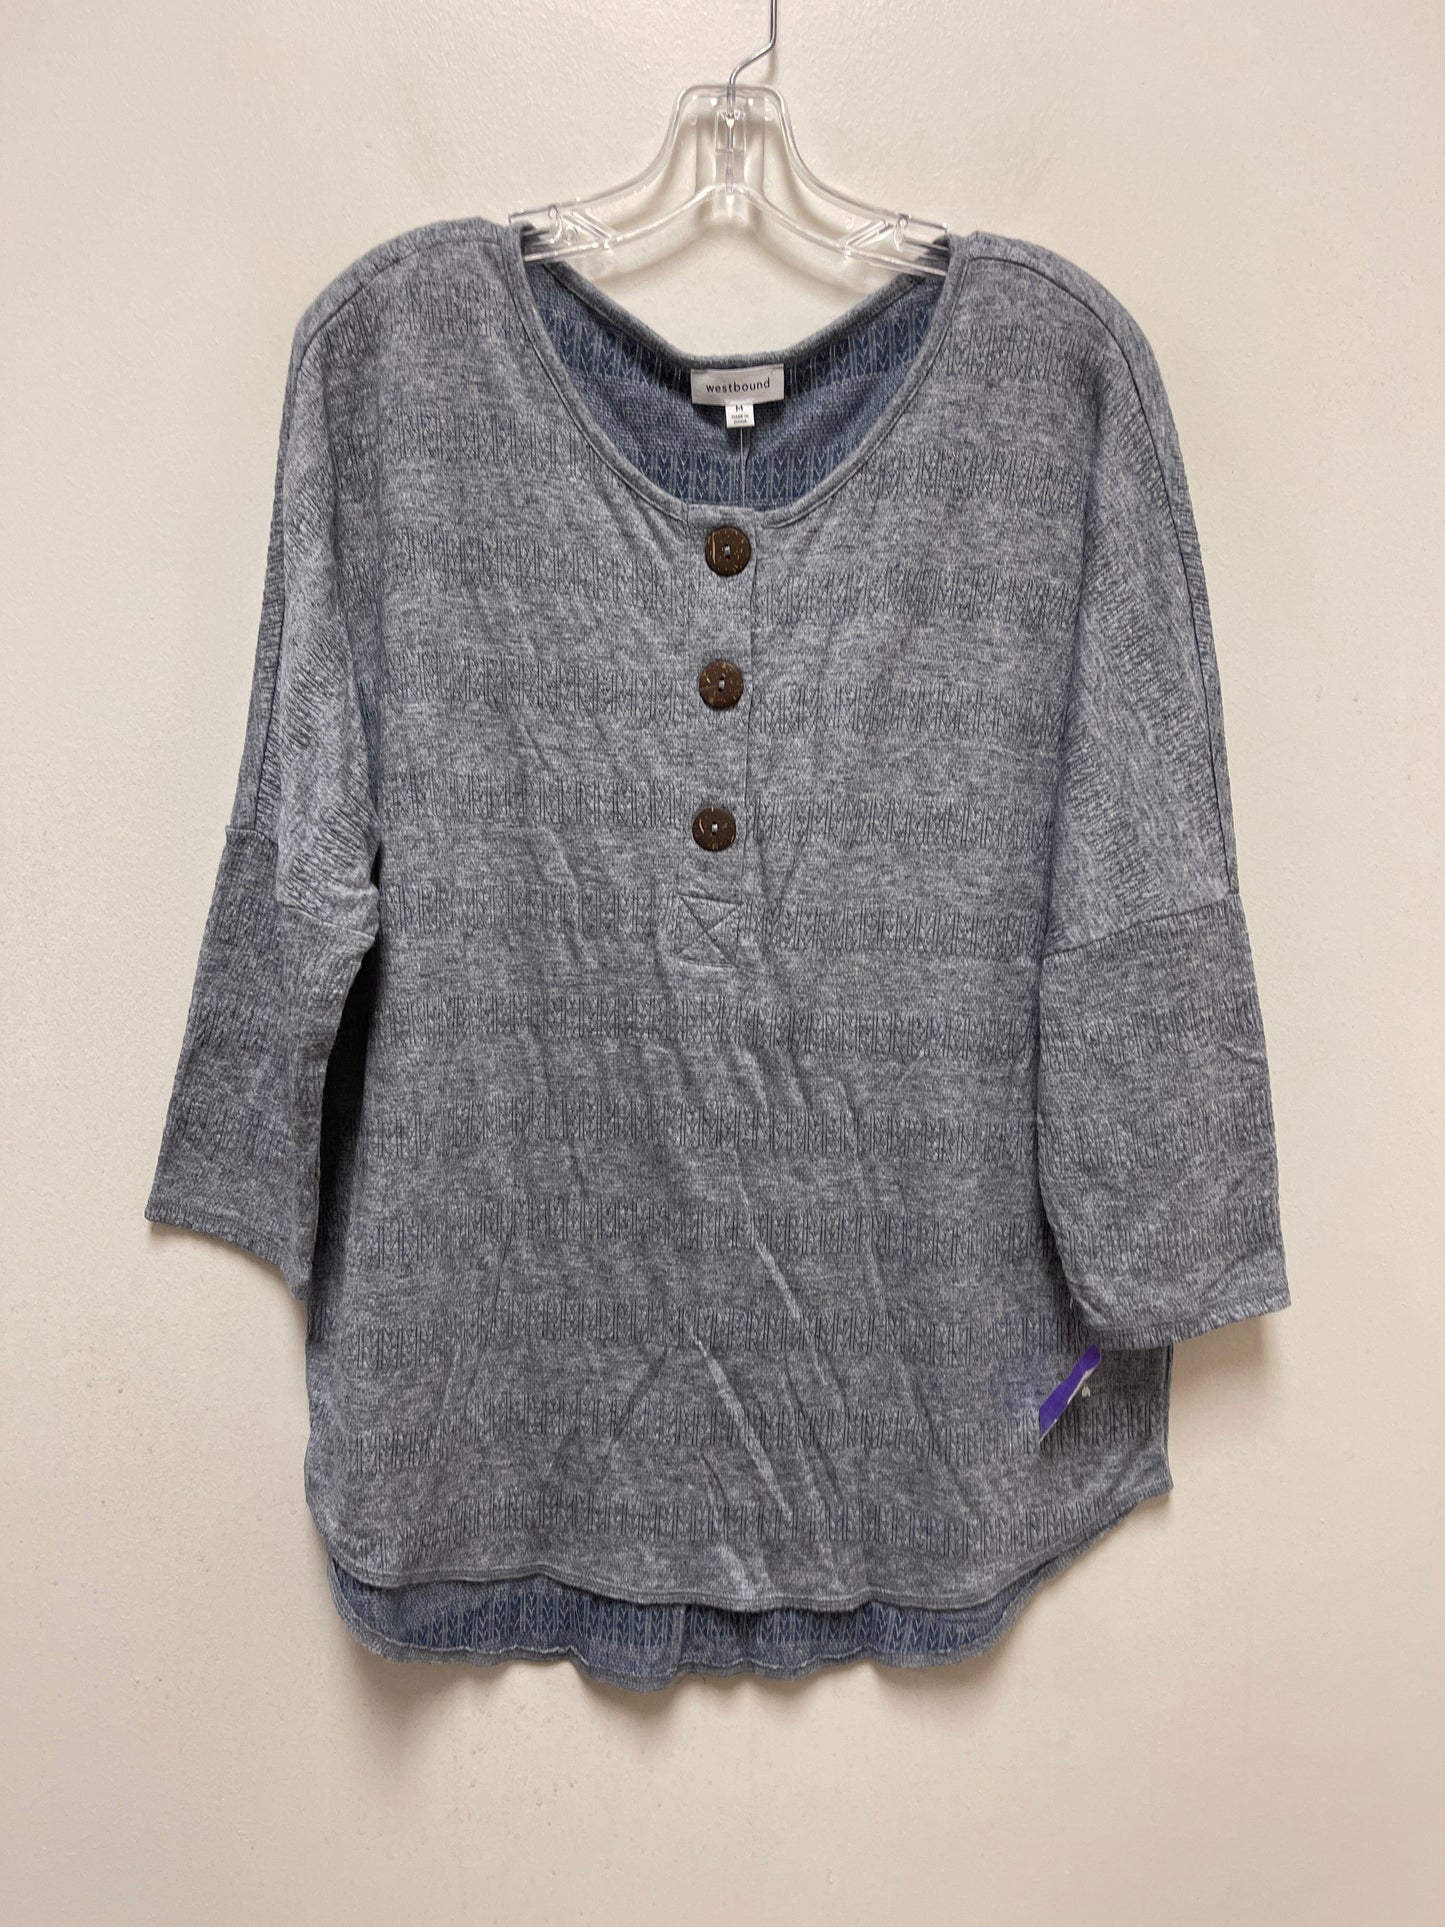 Blue Top Long Sleeve West Bound, Size M